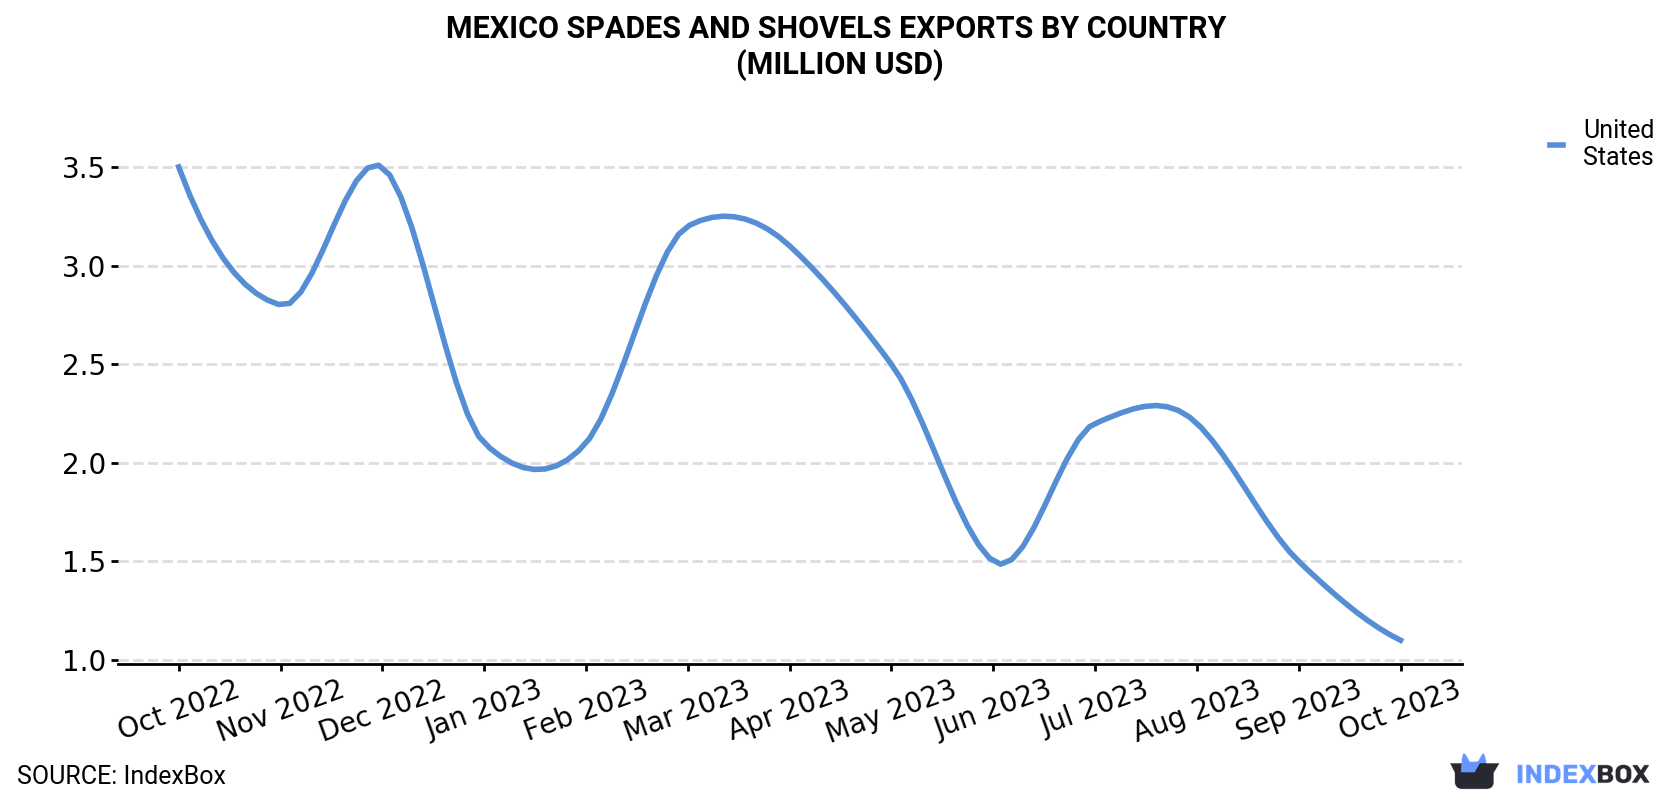 Mexico Spades And Shovels Exports By Country (Million USD)